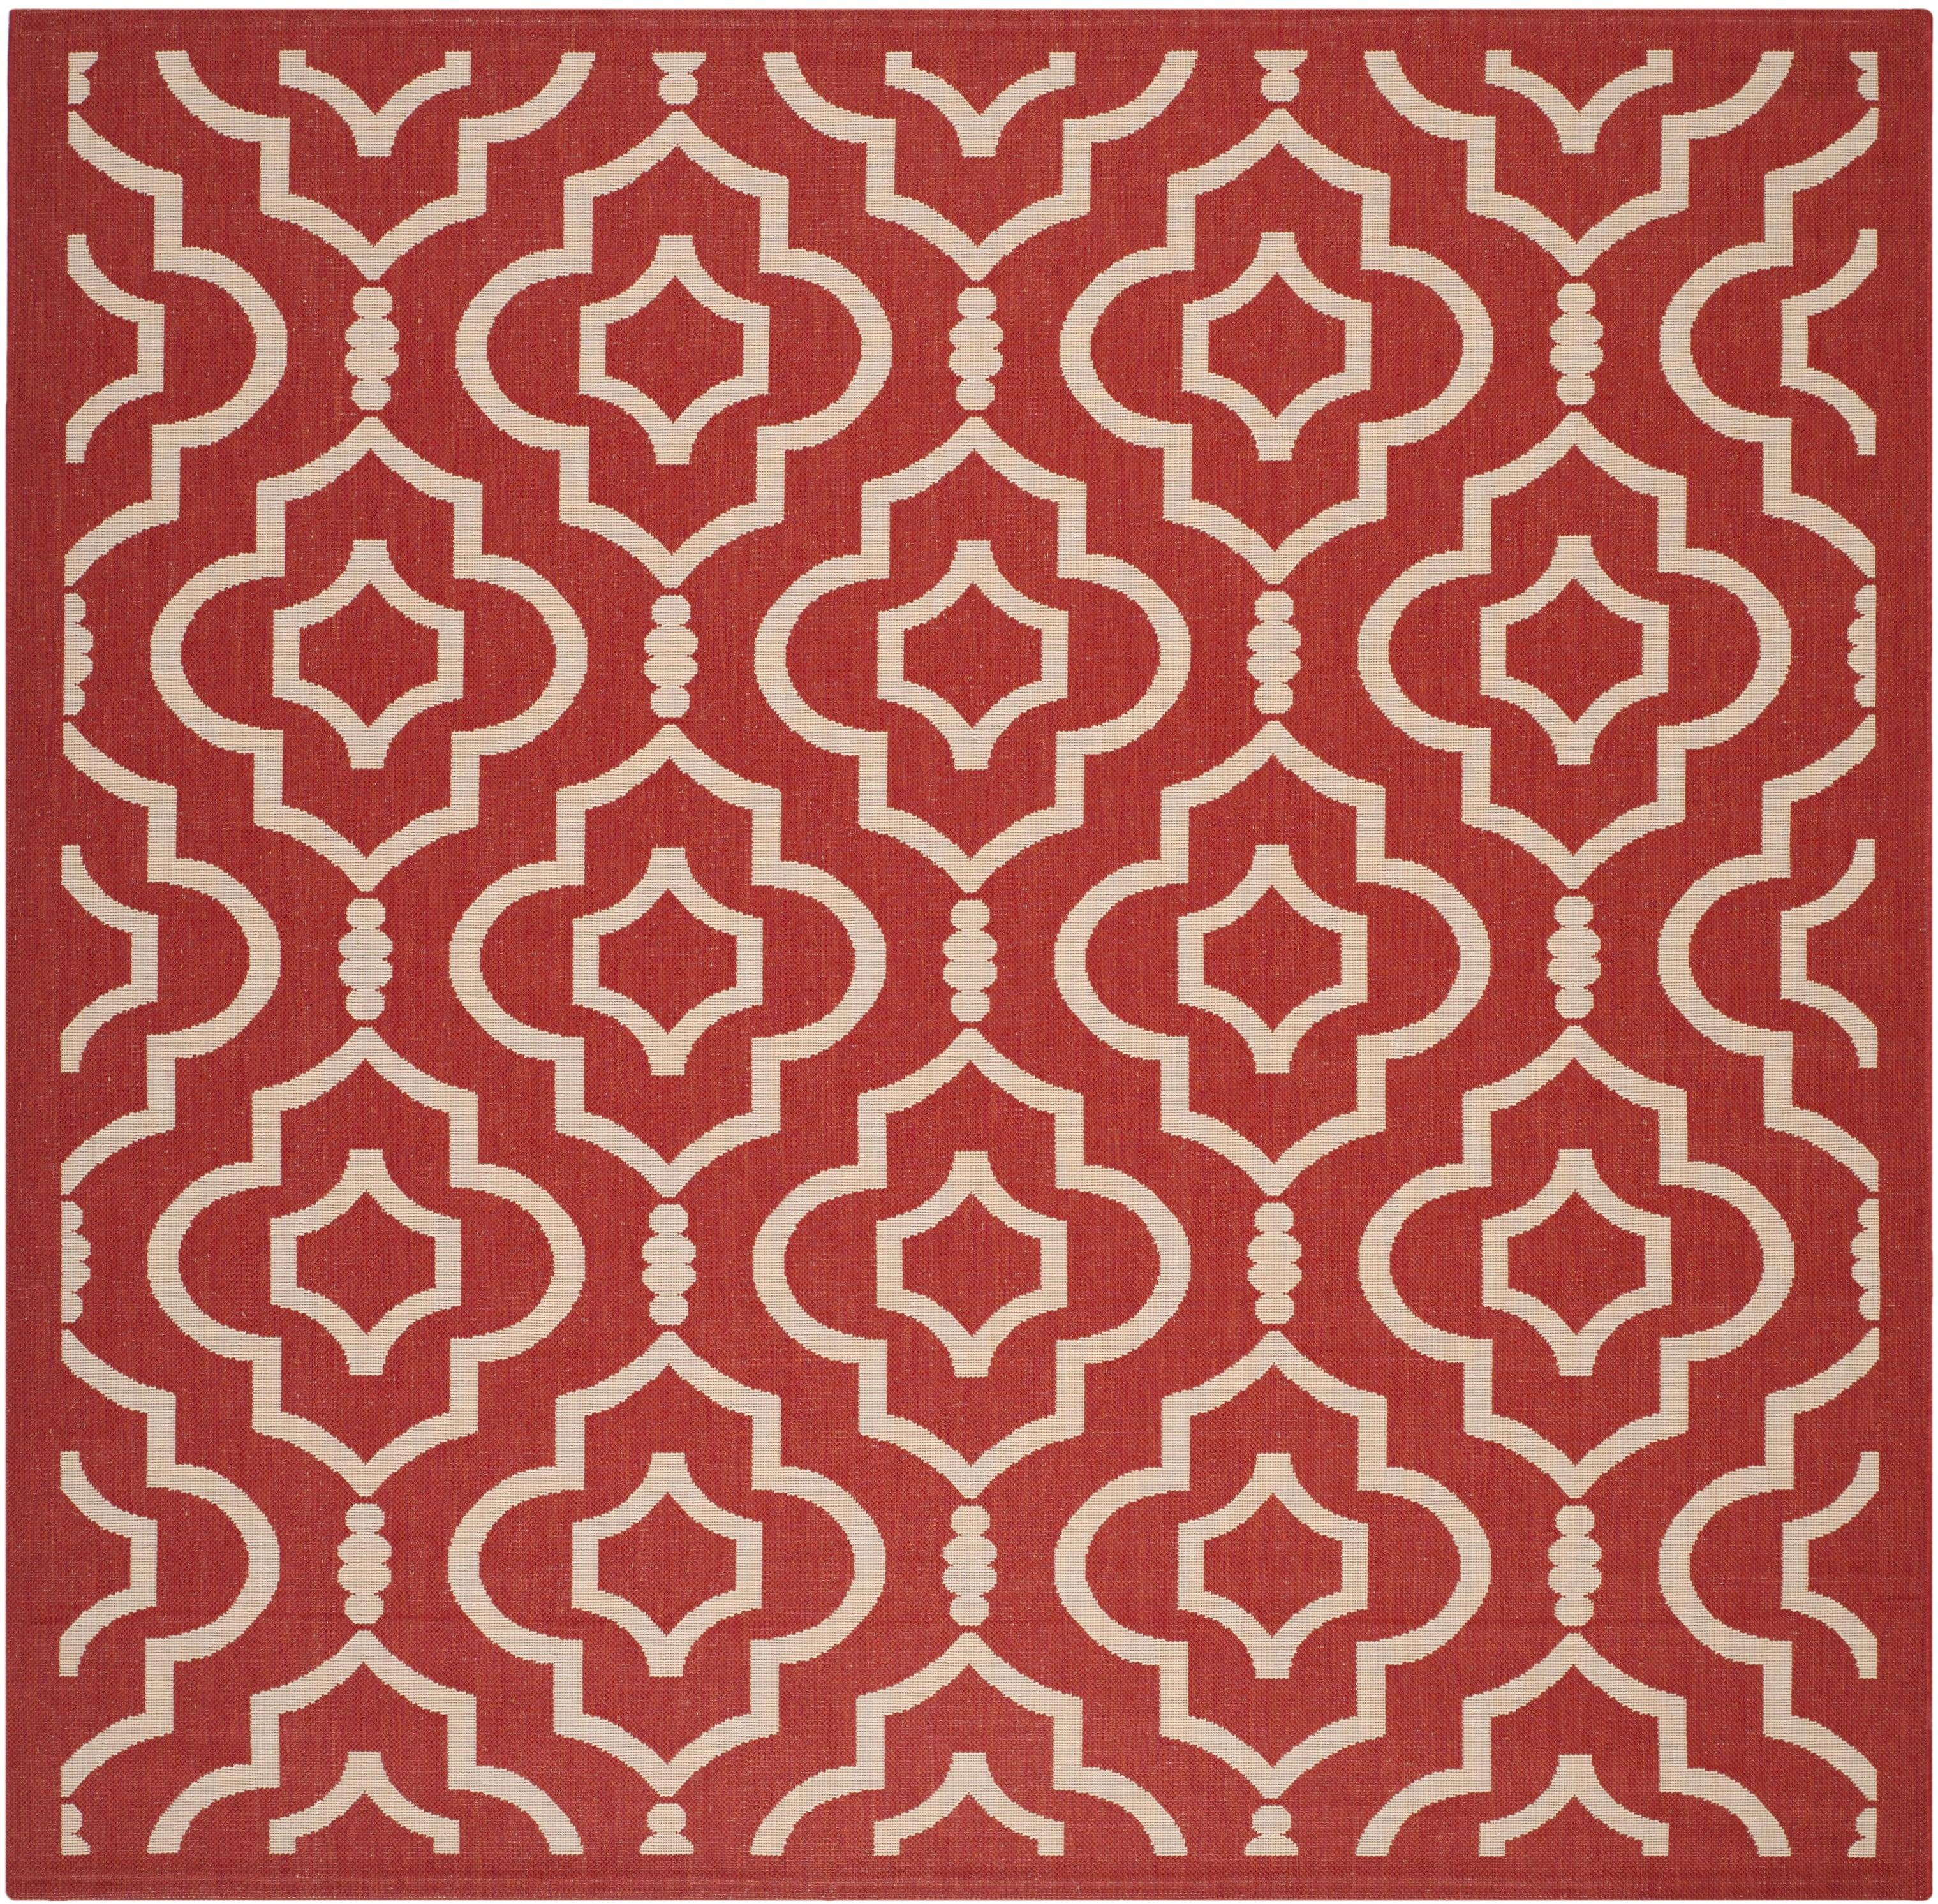 Red and Bone Geometric Square Indoor/Outdoor Area Rug